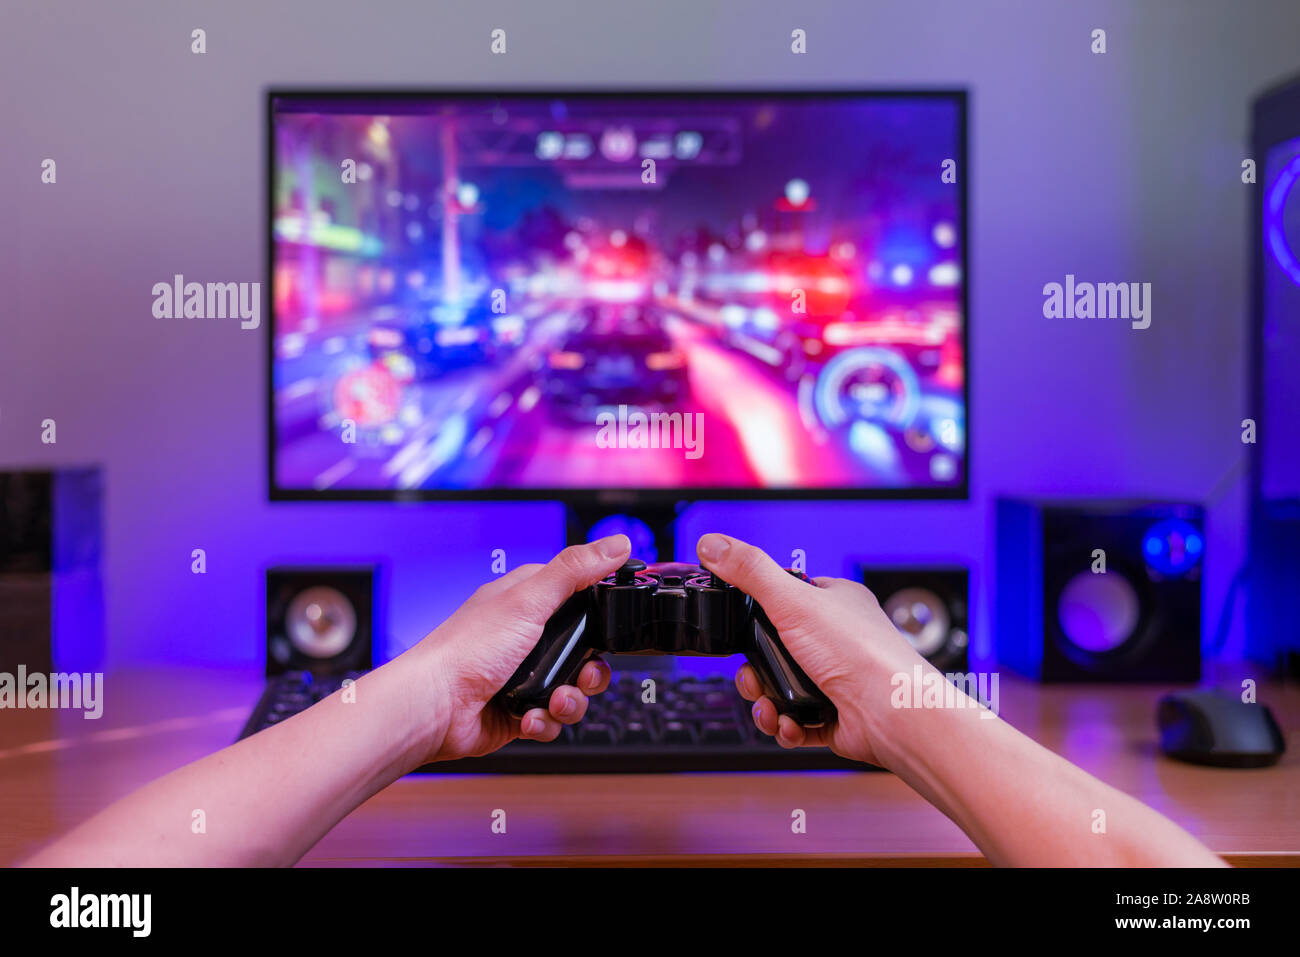 Joypad in hands. Computer gaming concept. Computer display with game in background. RGB light behind the desk. Stock Photo